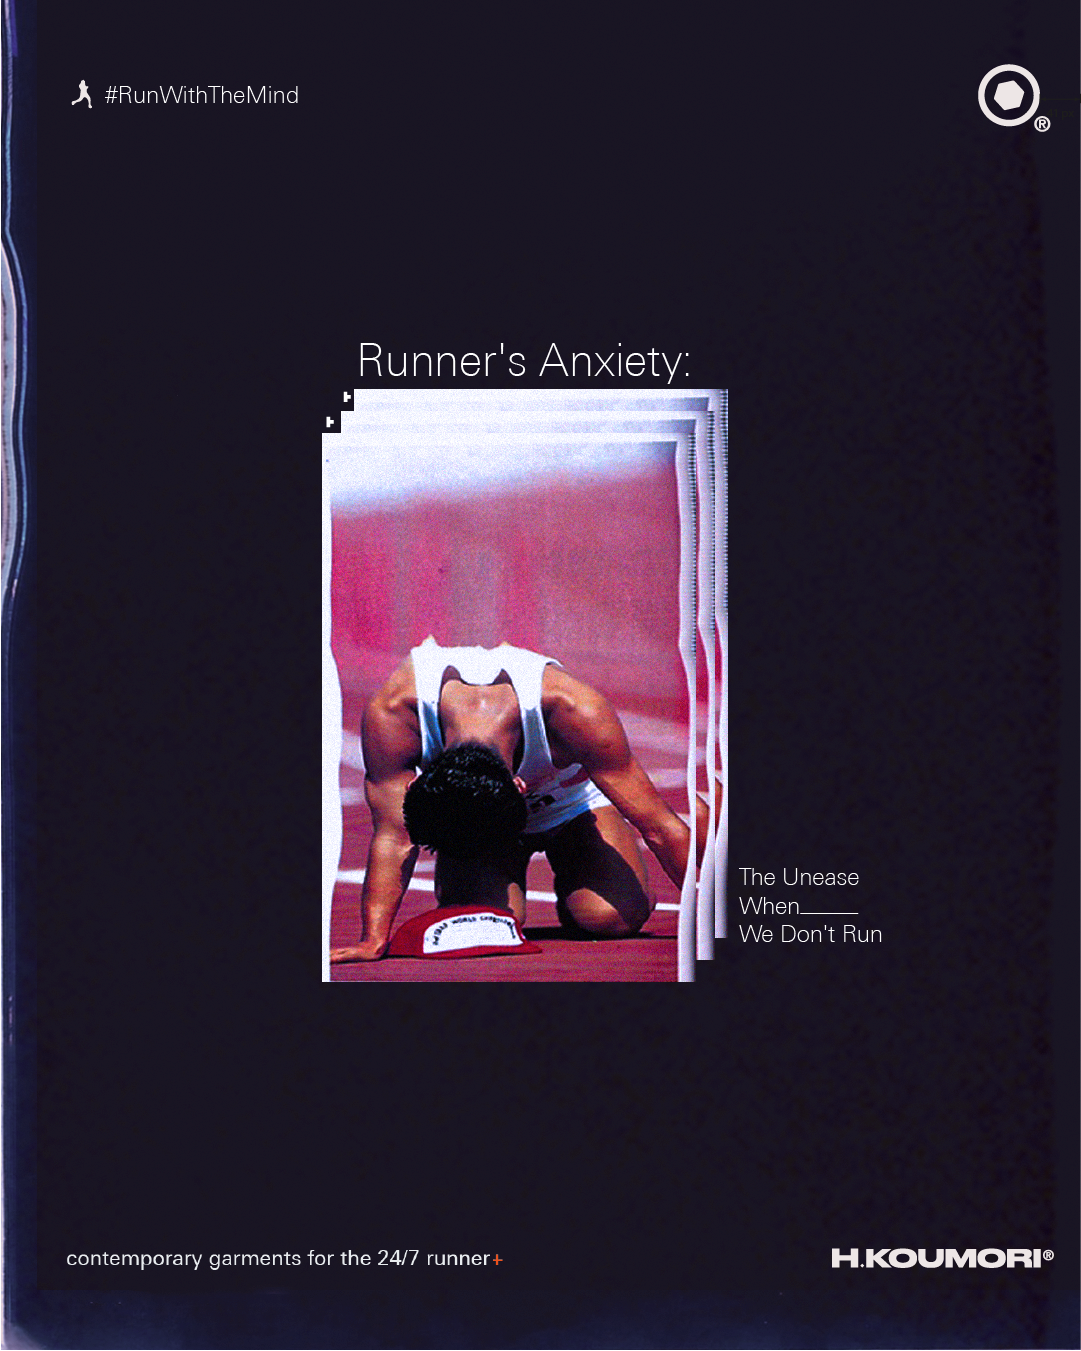 Runner's Anxiety: The Unease When We Don't Run